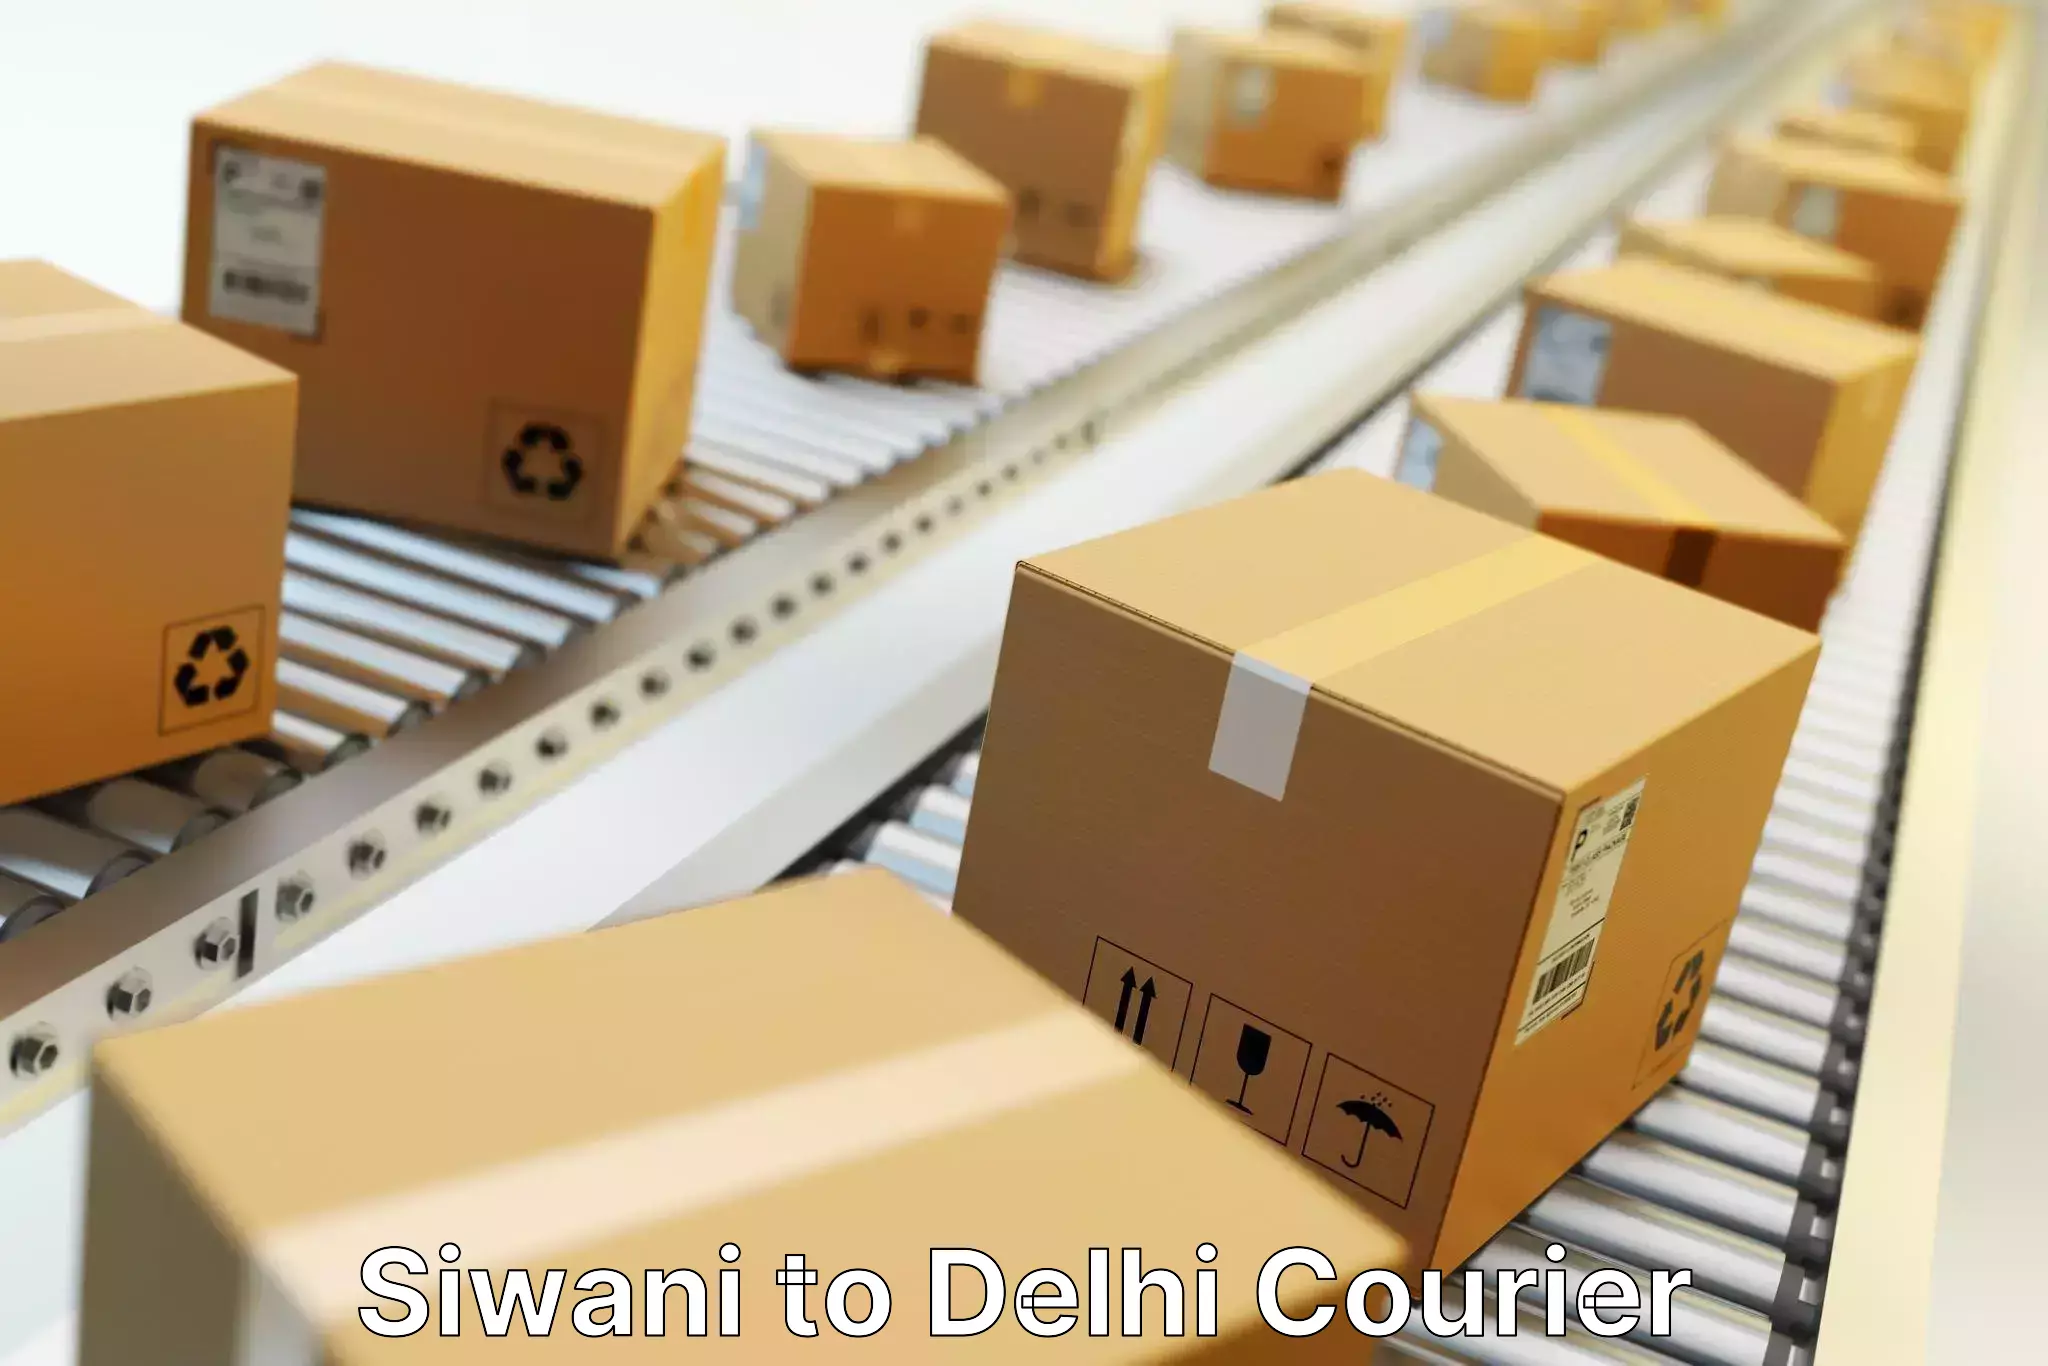 Subscription-based courier Siwani to Delhi